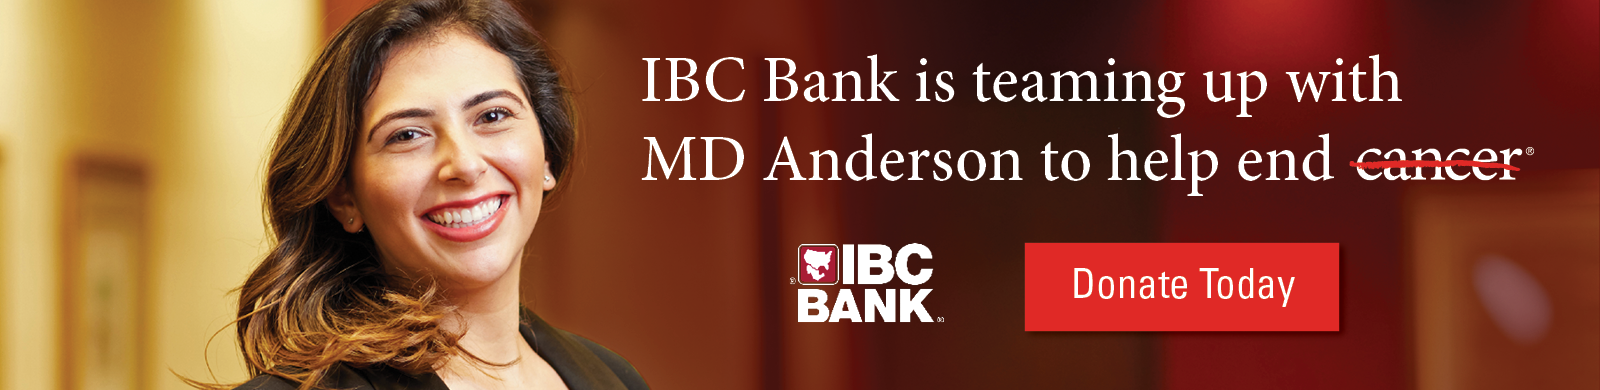 IBC Bank is teaming up with MD Anderson to help end cancer – Donate Today